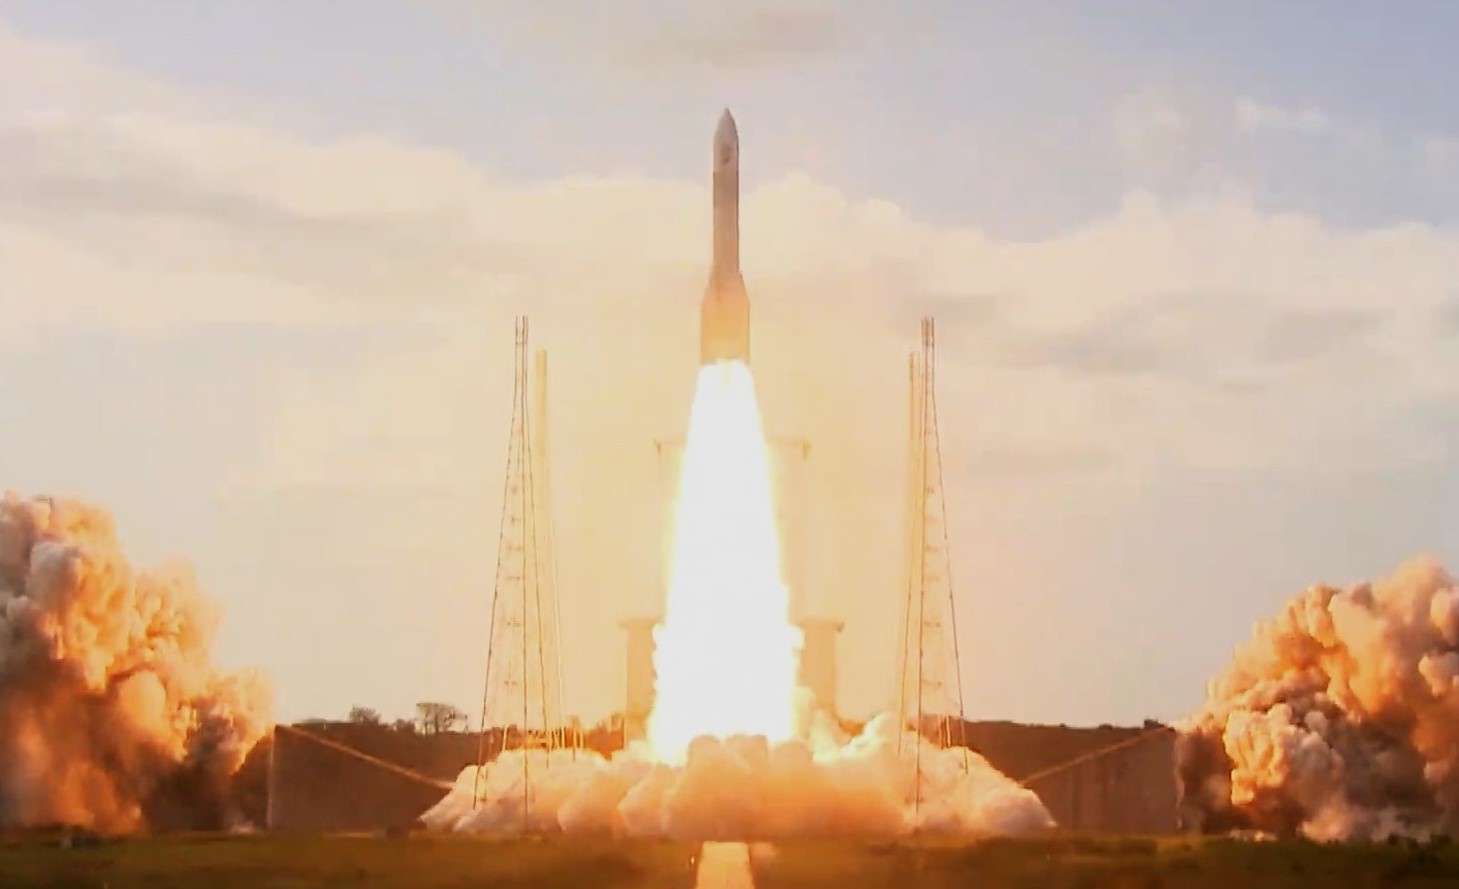 Ariane 6 Rocket’s Debut Puts Europe Back in the Launch Game